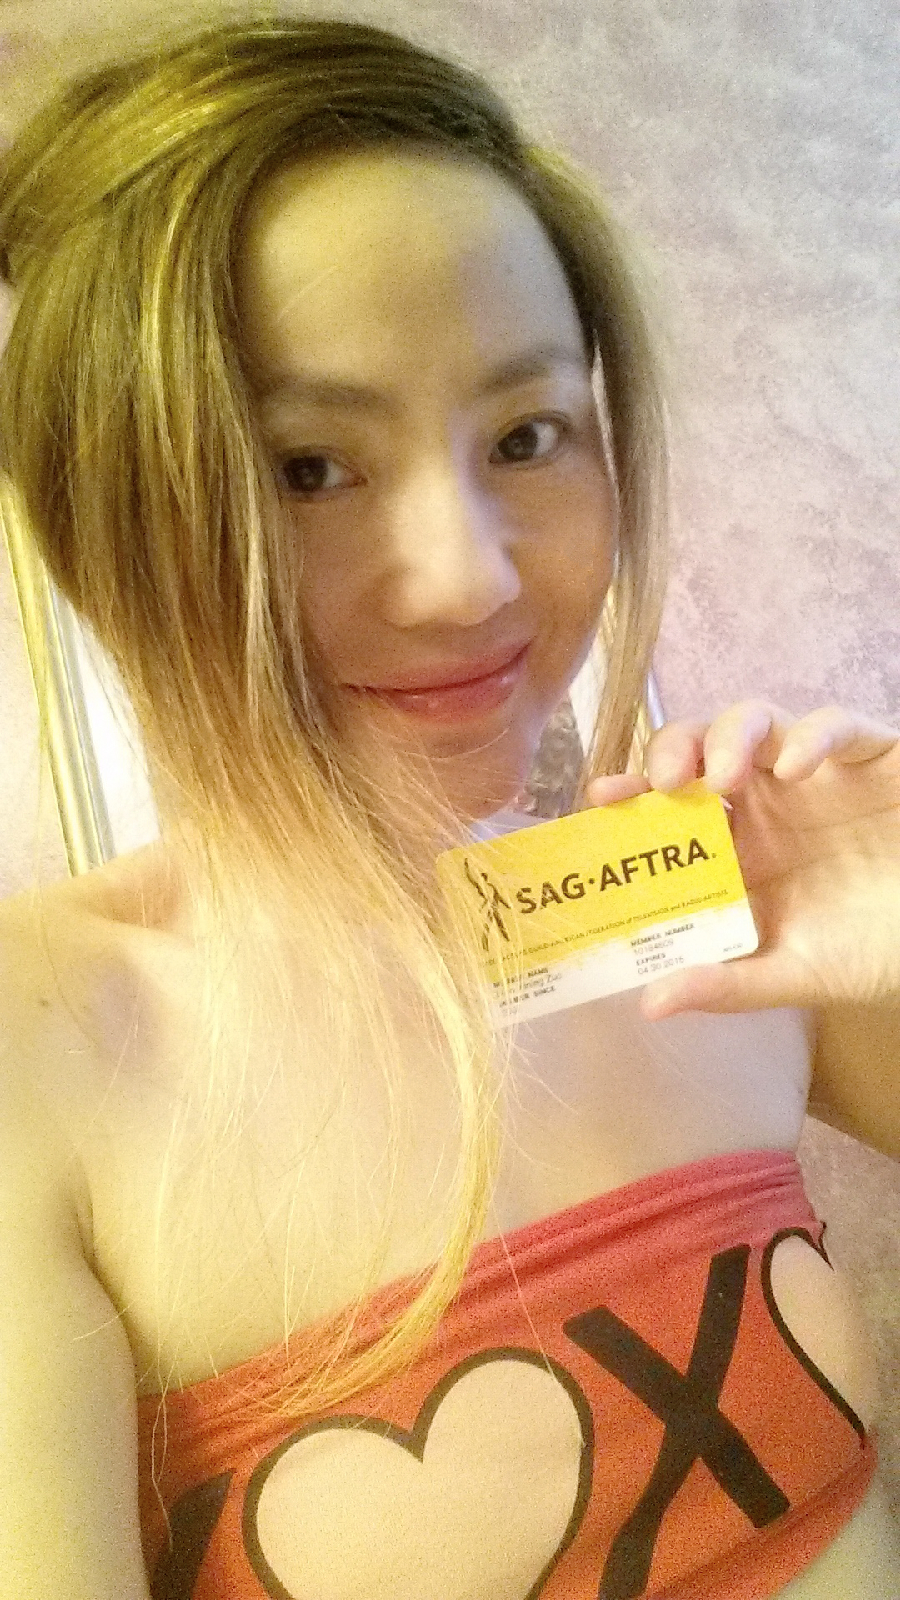 actress nina xining zuo with her sag card - per screen actors guild request.